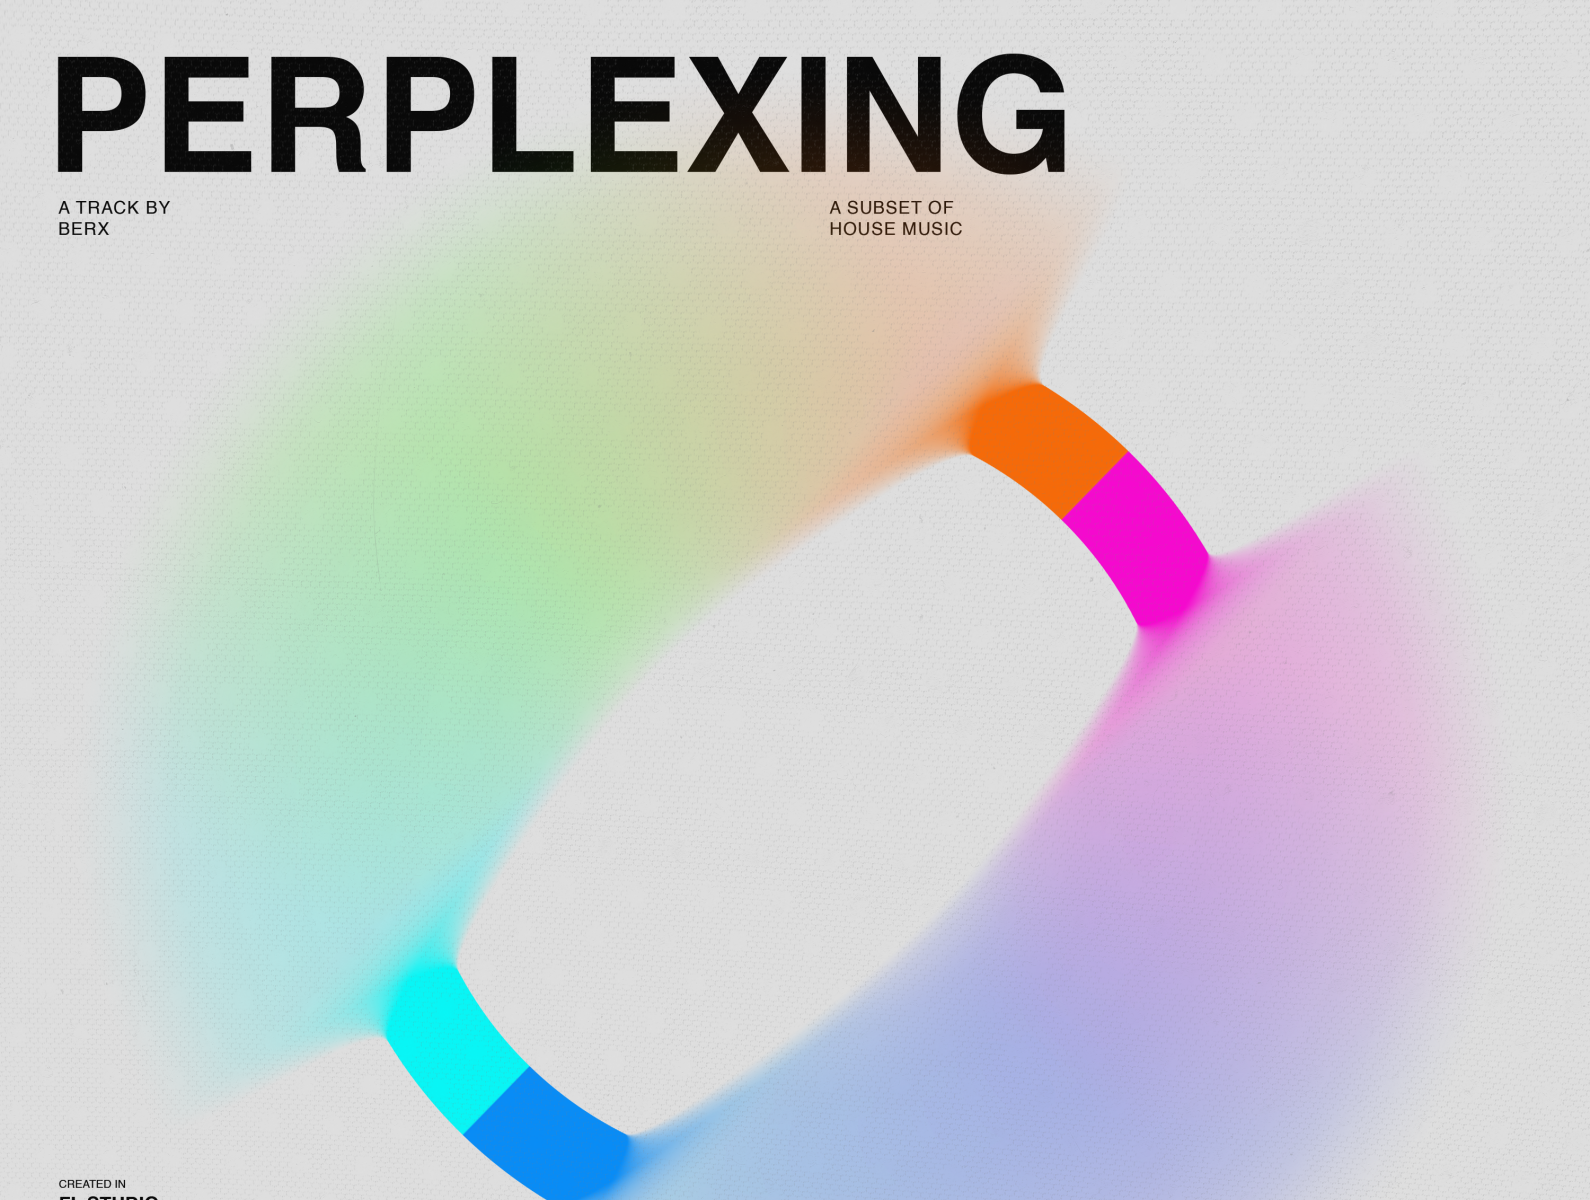 (Cover Art) Berx - Perplexing by Aiden on Dribbble